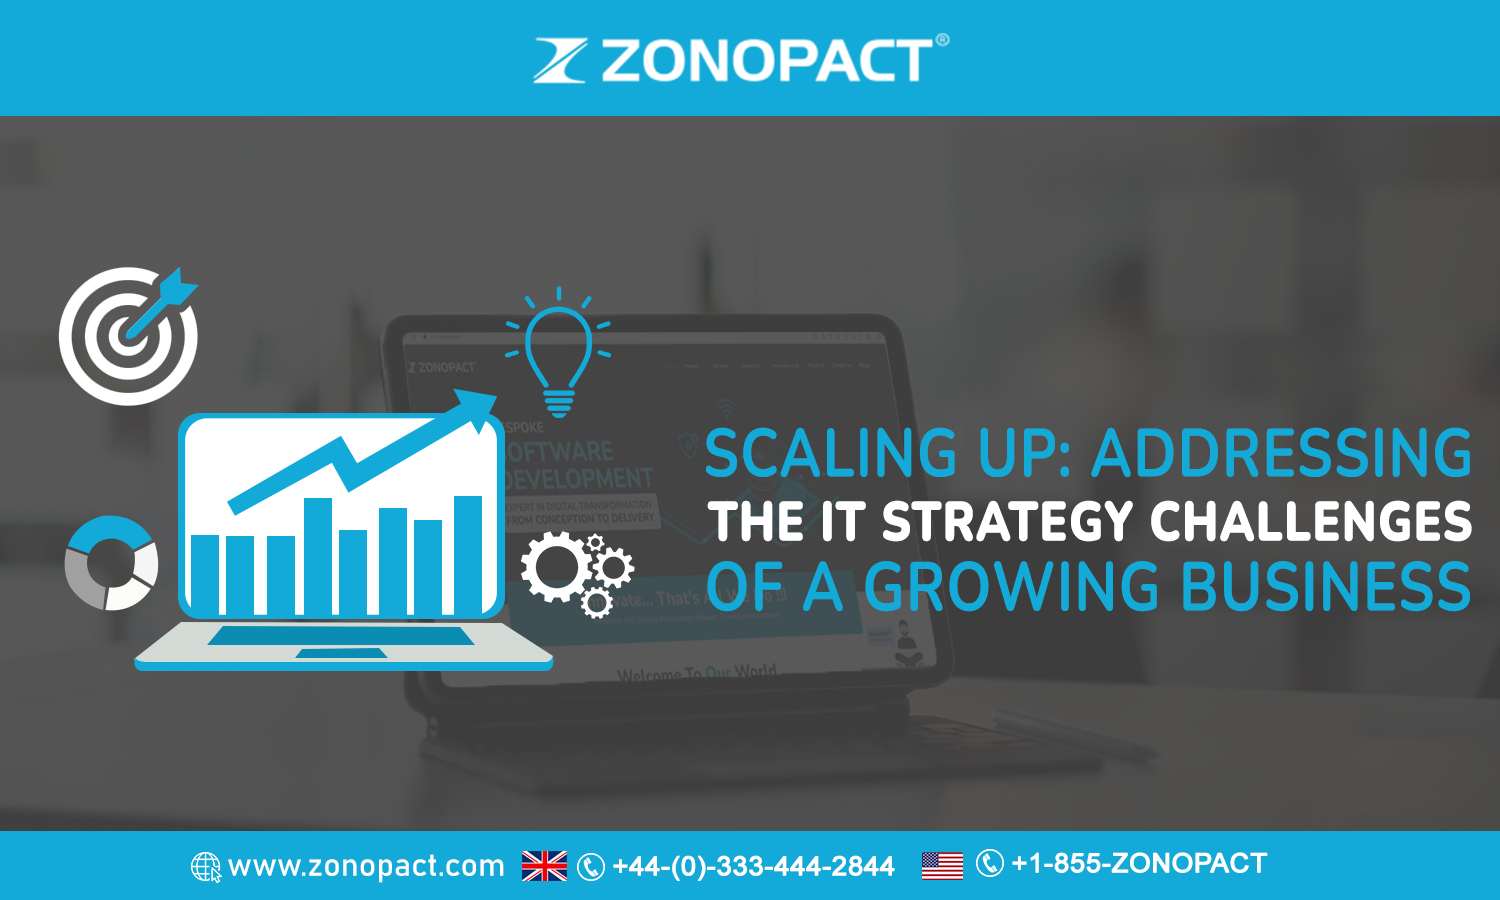 Scaling Up Addressing the IT Strategy Challenges of a Growing Business (1)